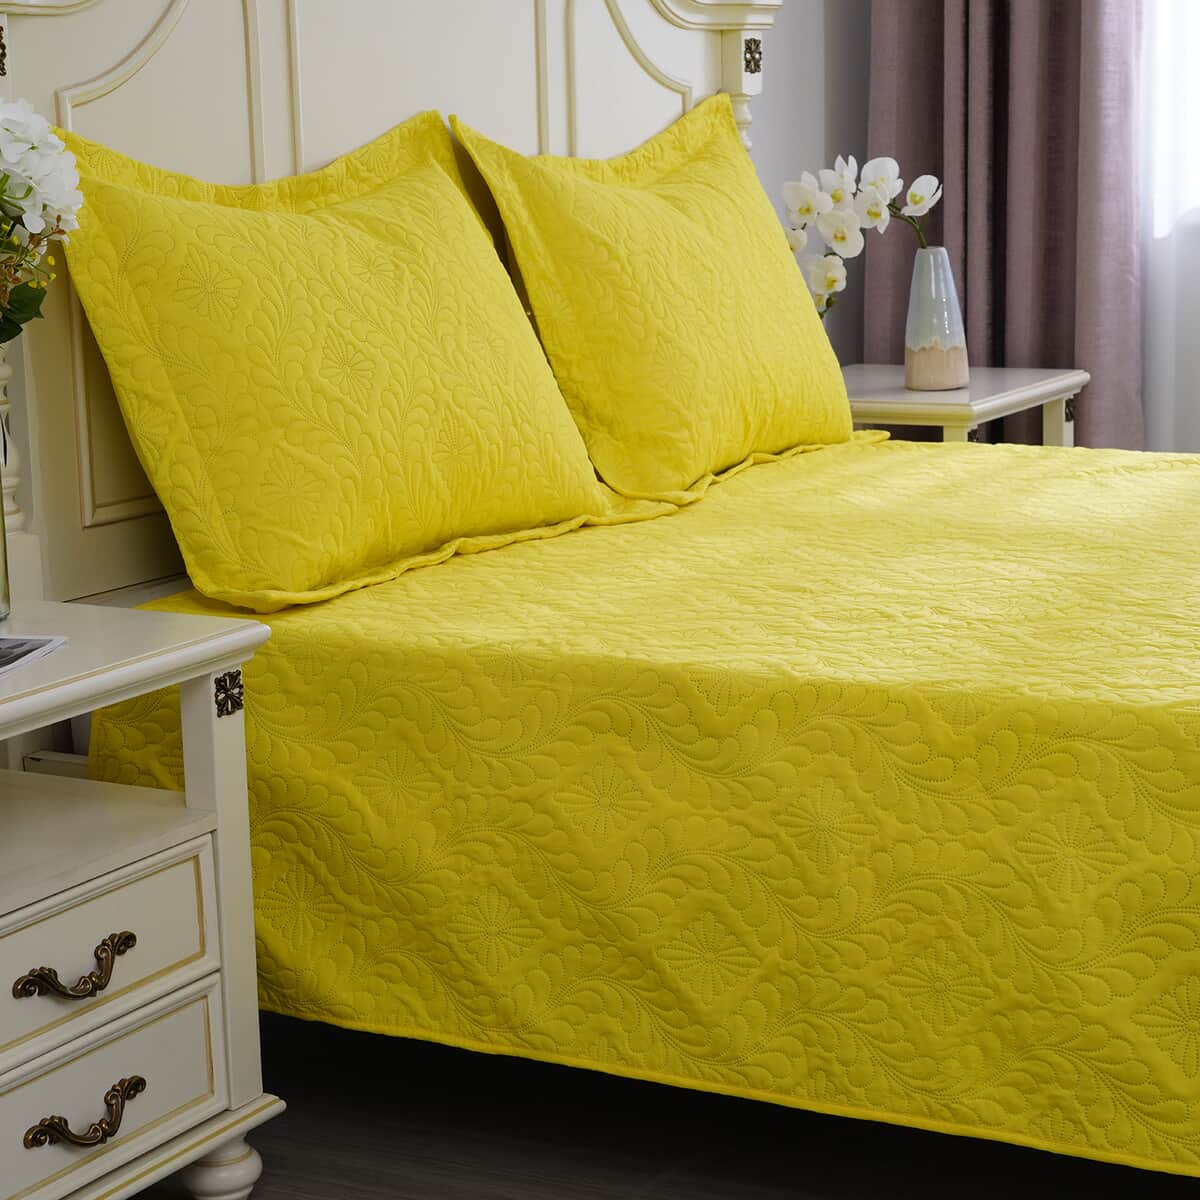 Homesmart 3 Pcs Solid Yellow Pinsonic Quilt Bedding Set - King Size image number 2